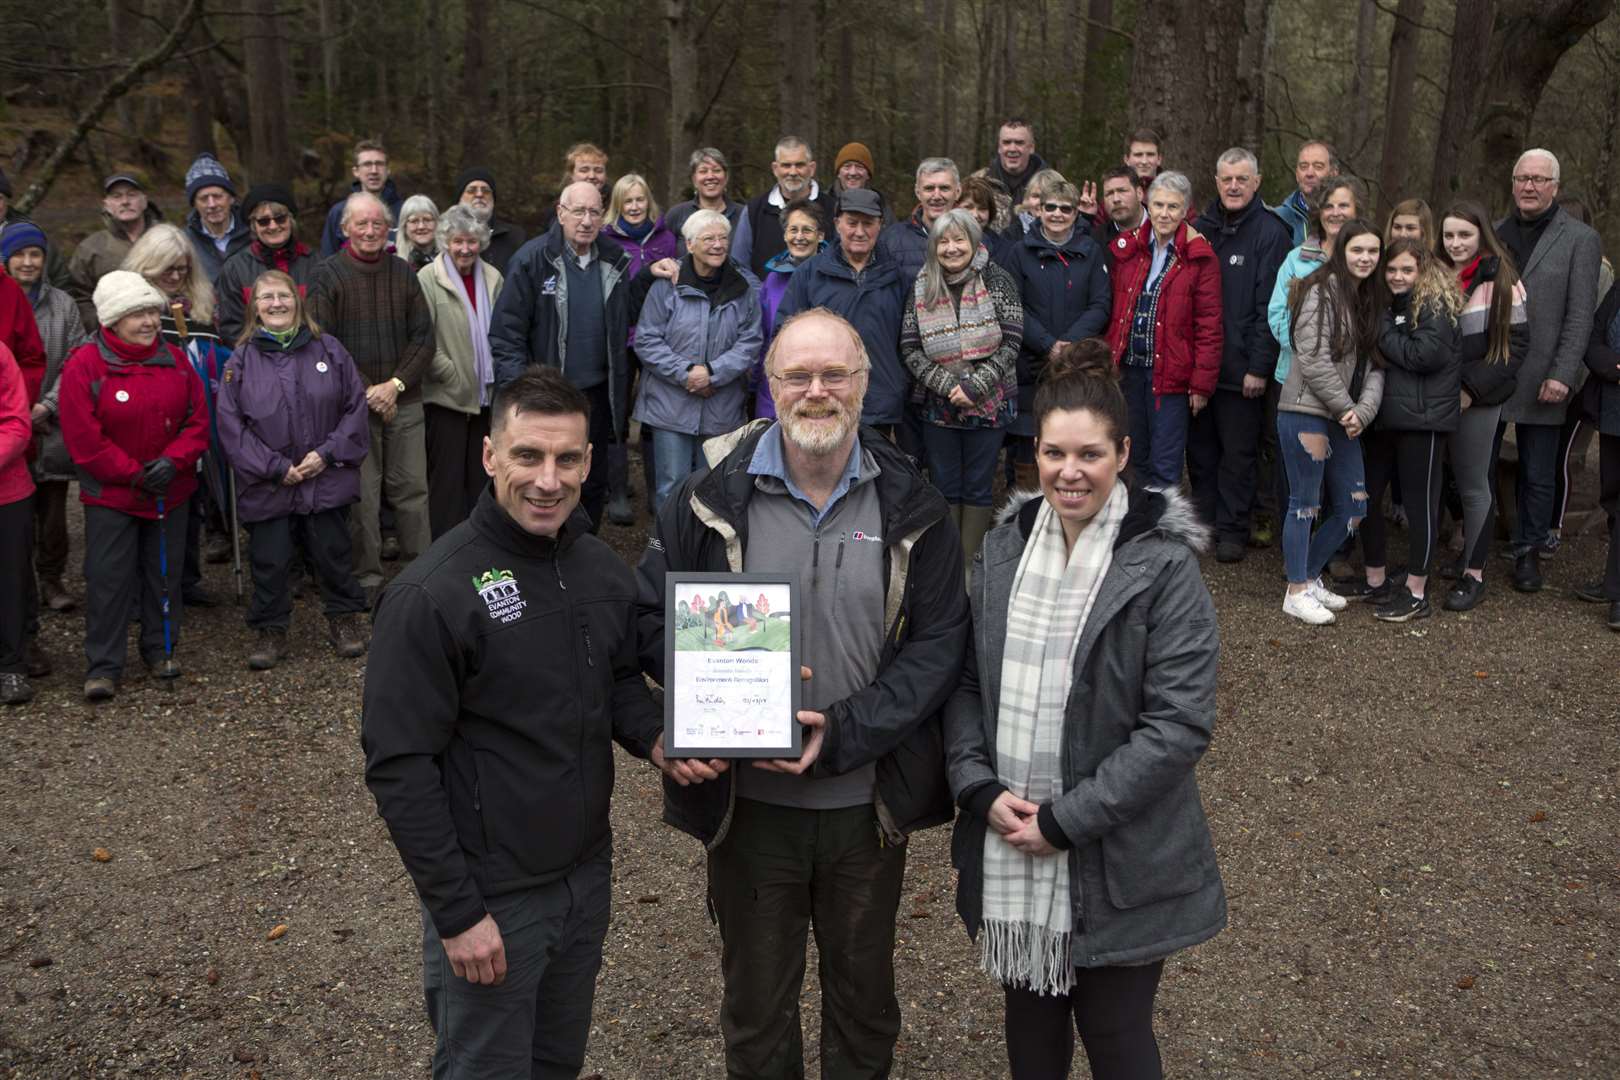 Pictured with Evanton Community Woodland’s Dementia Friendly Environment recognition award are (l-r) Simon Harry, Evanton Woodland education officer, Douglas Wilson of Evanton Community Woodland and Kayleigh Lytham, Paths for All development officer.